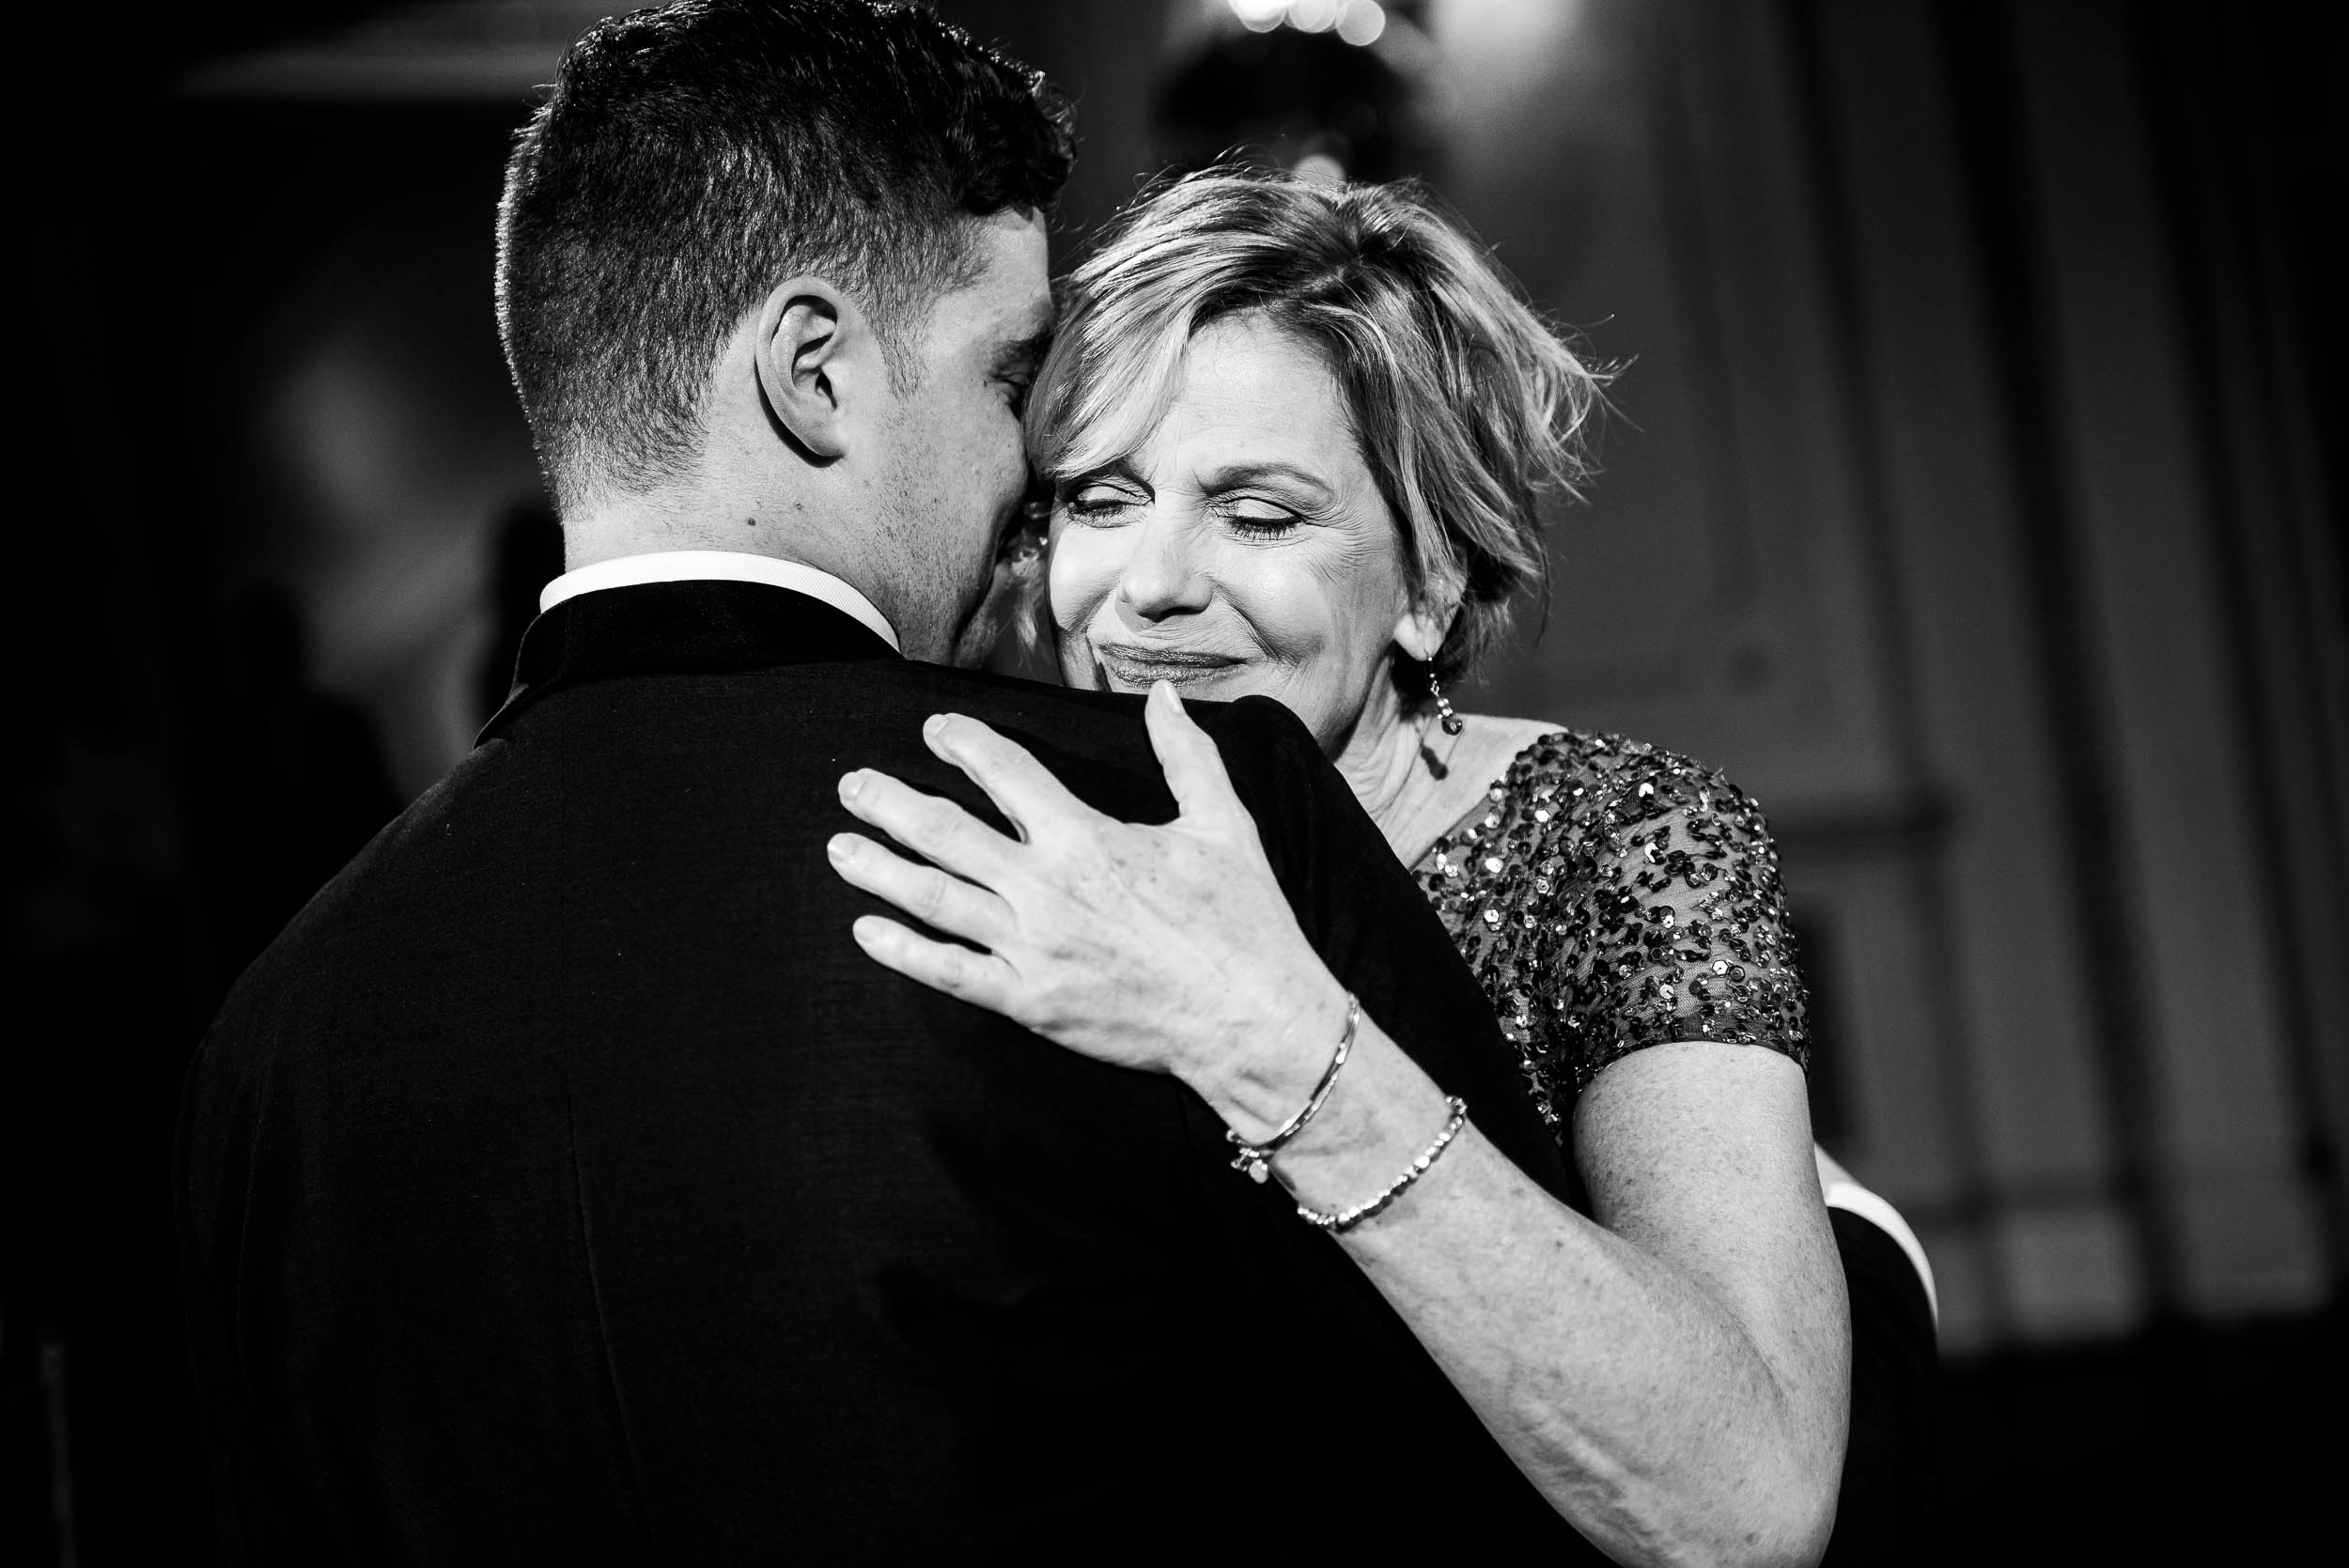 Mother/son dance for luxurious fall wedding at the Chicago Symphony Center captured by J. Brown Photography. See more wedding ideas at jbrownphotography.com!